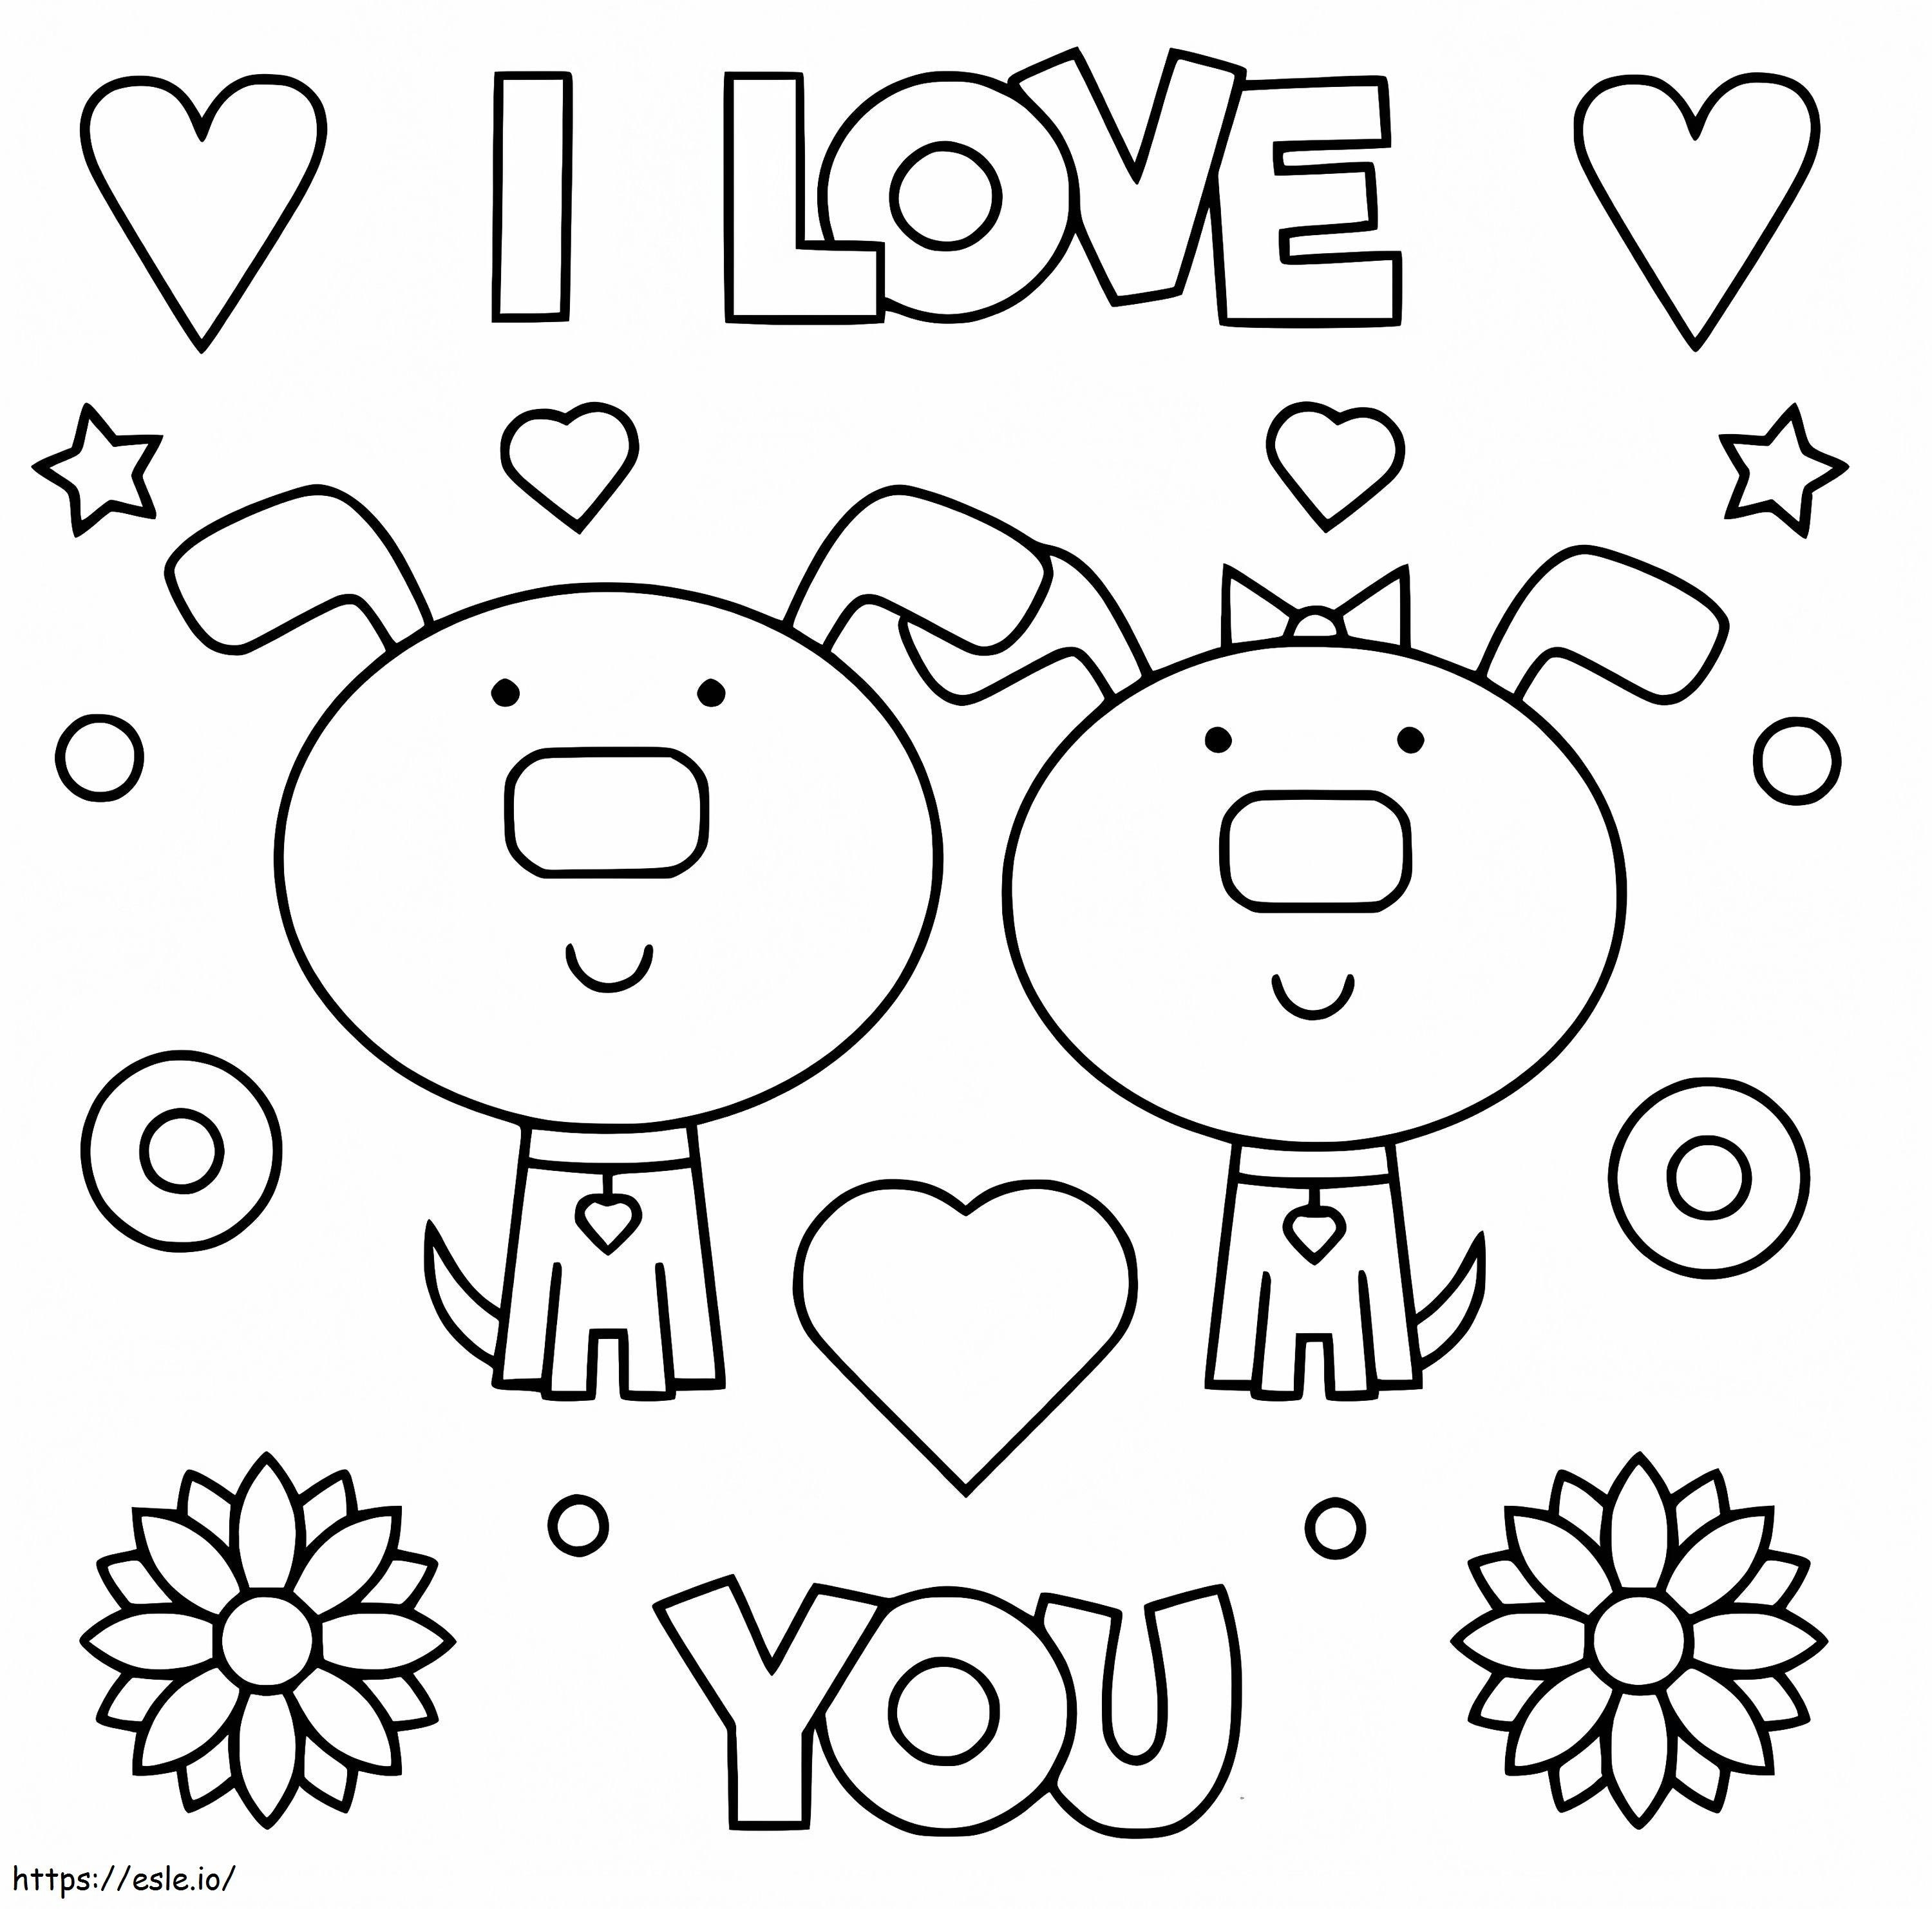 Cute Puppy Couple coloring page